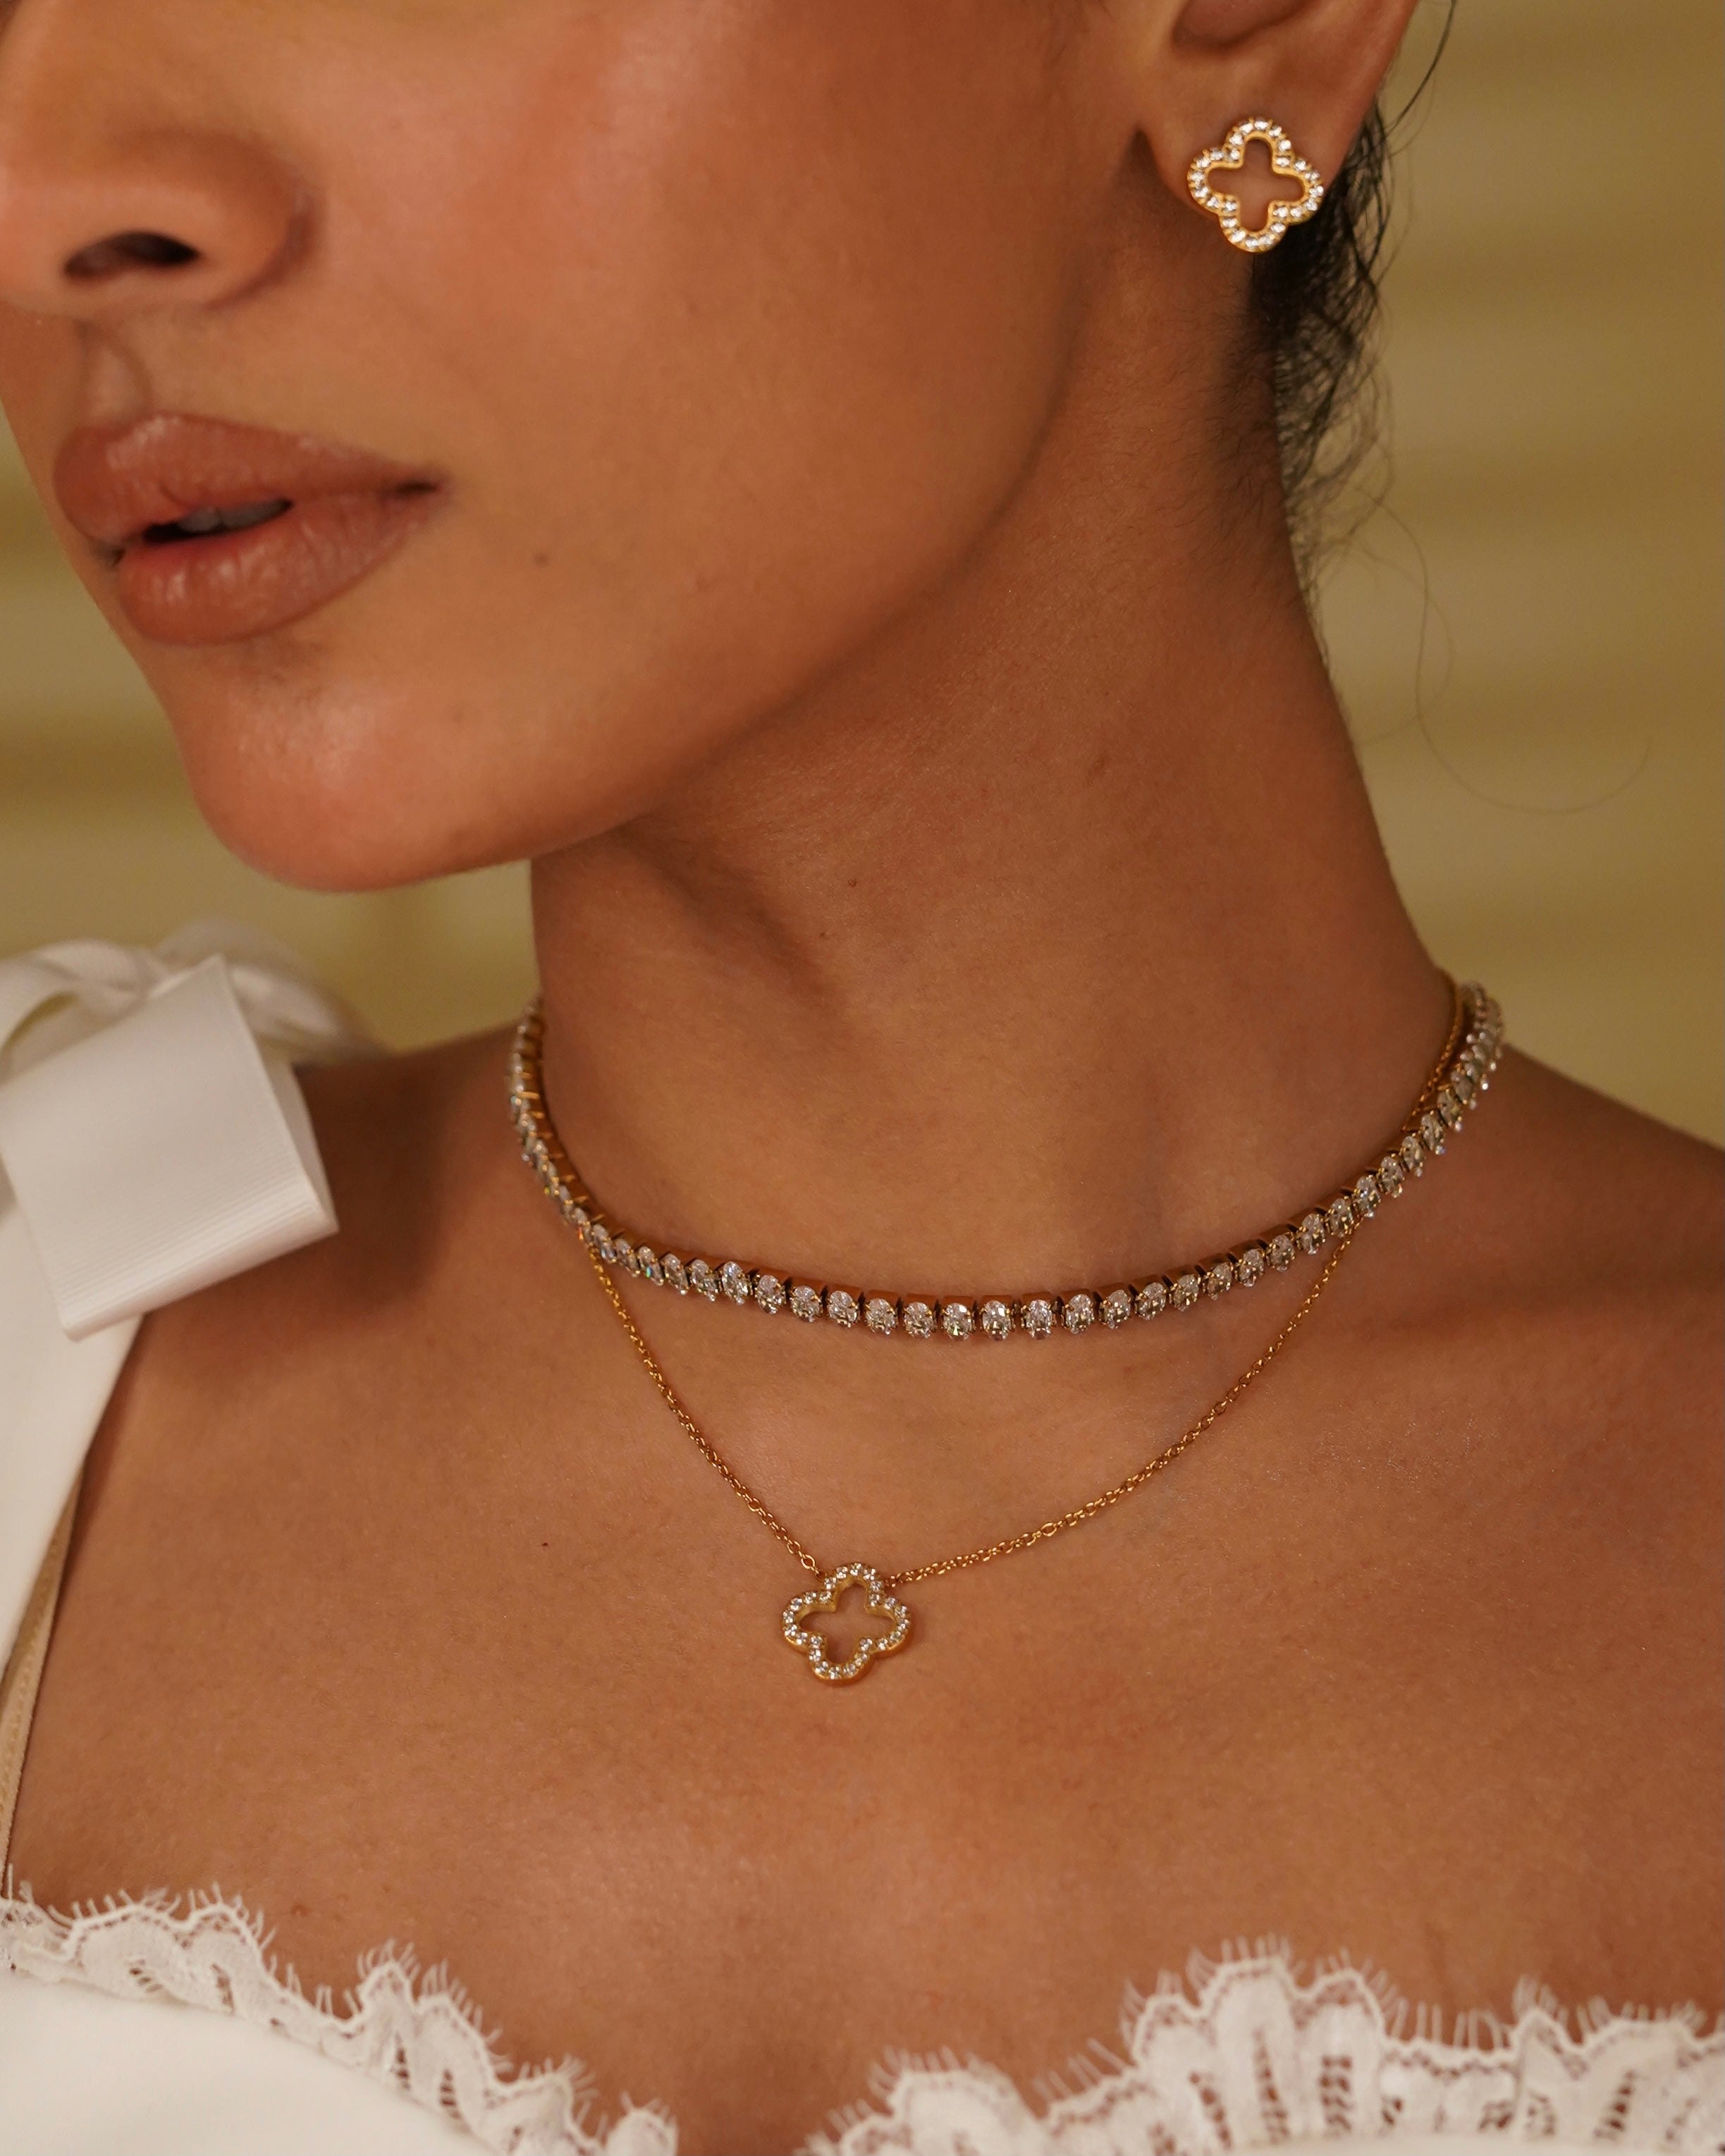 Hollow Clover Studded Necklace